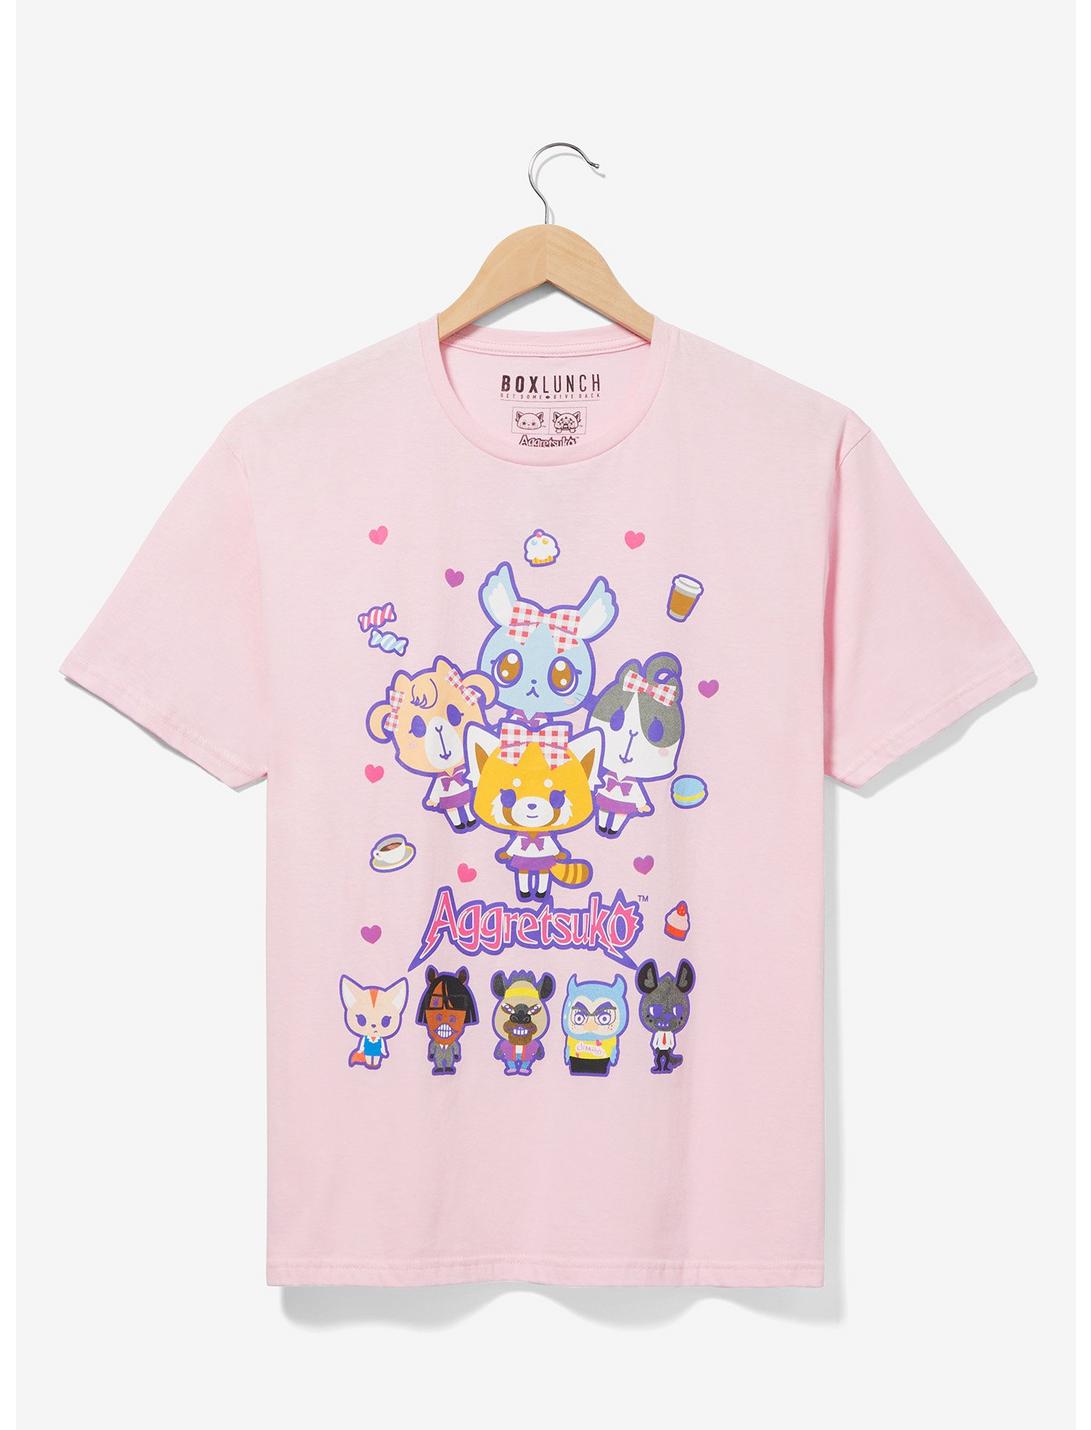 Sanrio Aggretsuko Characters Group Portrait Women's T-Shirt - BoxLunch Exclusive, LIGHT PINK, hi-res